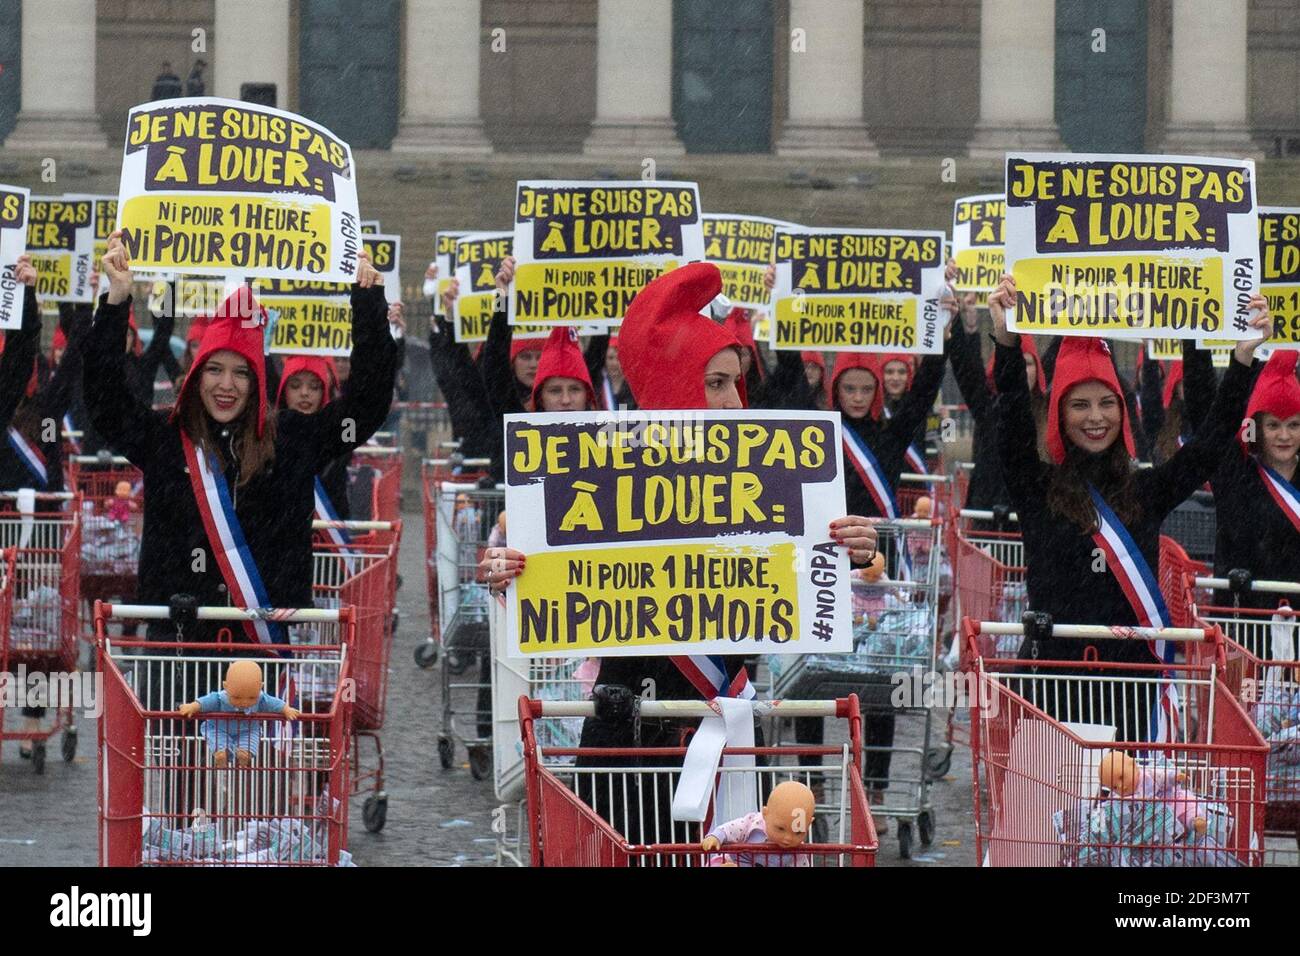 A hundred women dressed as Marianne (symbol of French Republic) stage a  protest against assisted reproductive technology (ART) and surrogacy in  front of the National Assembly (French Parliament), a Flash mob organised